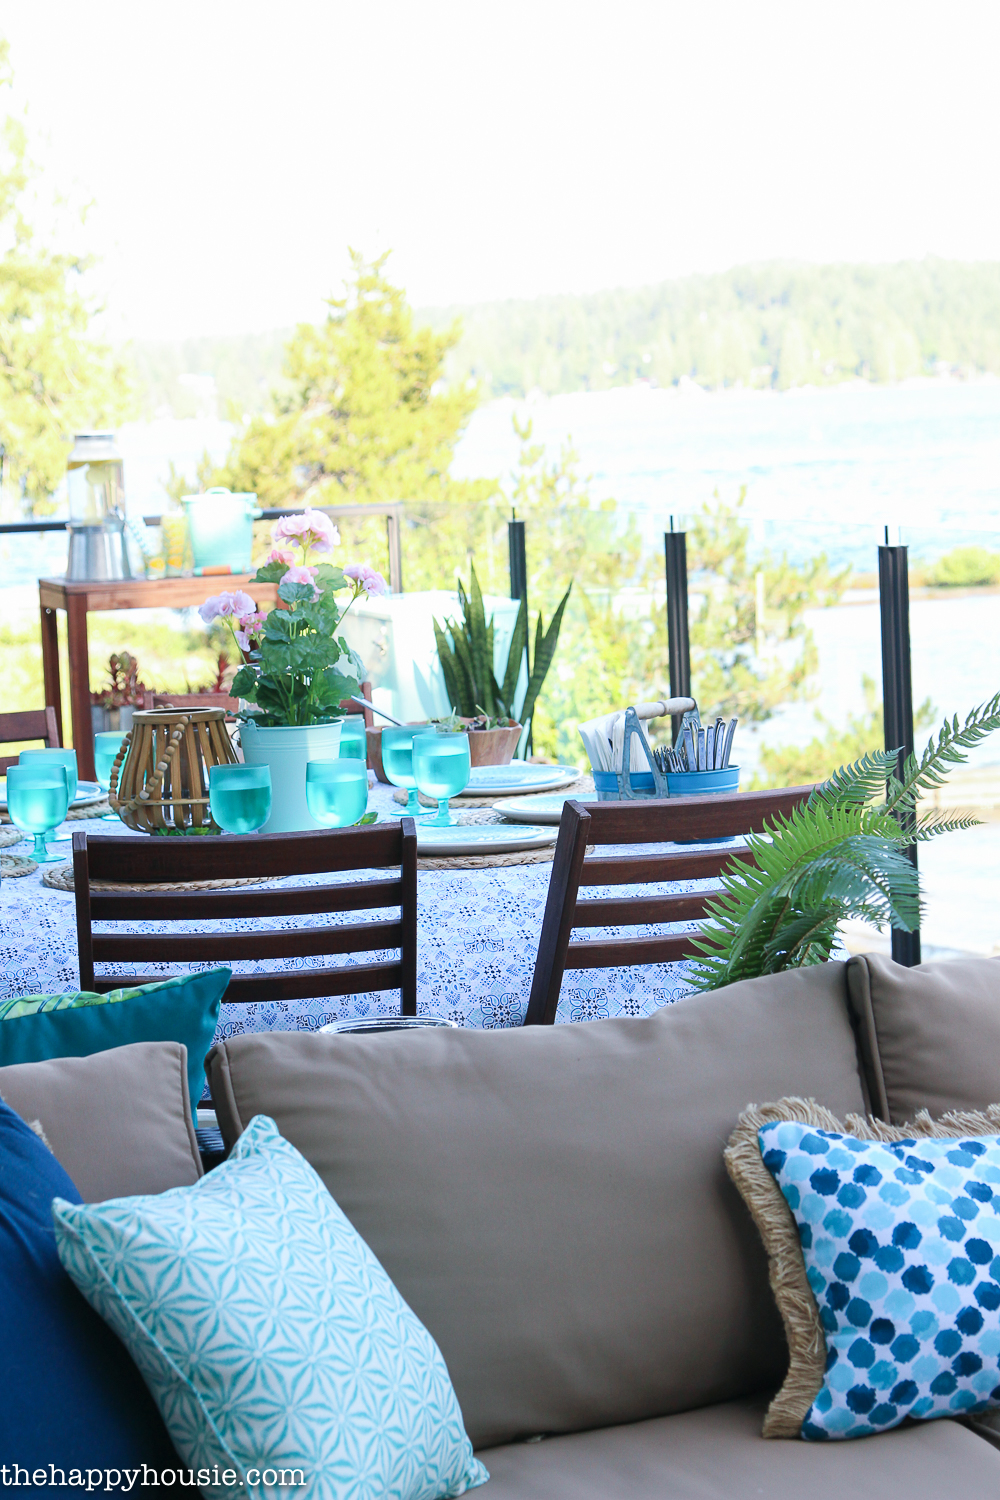 The outdoor patio overlooking the lake.